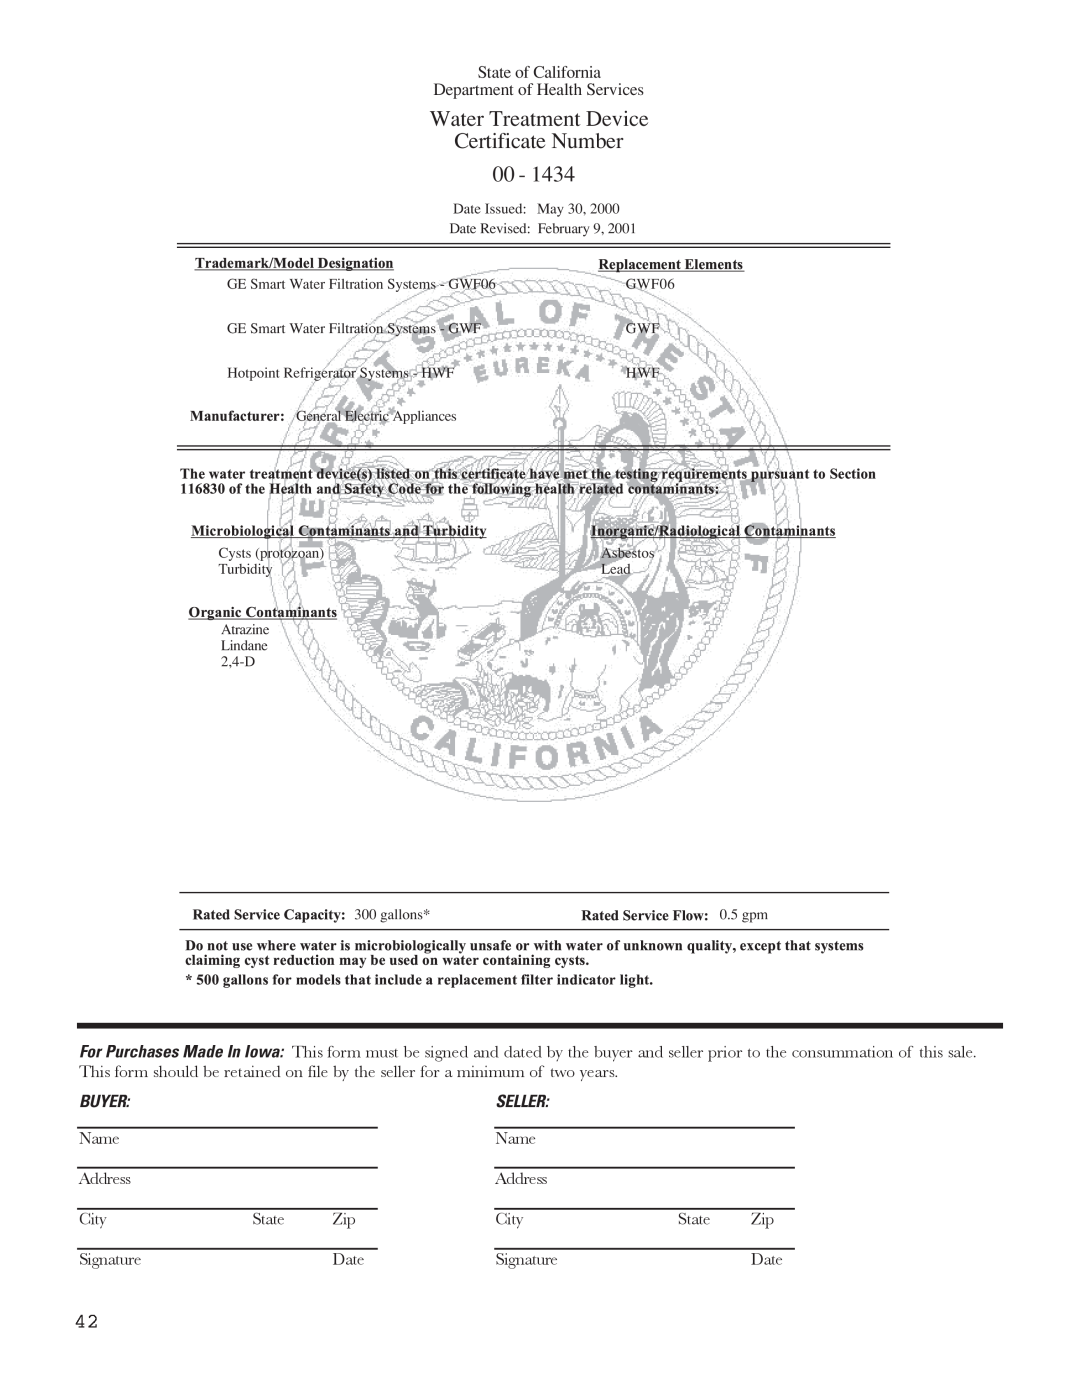 GE 49-60637 Water Treatment Device, Certificate Number, State of California Department of Health Services, Buyer, Seller 